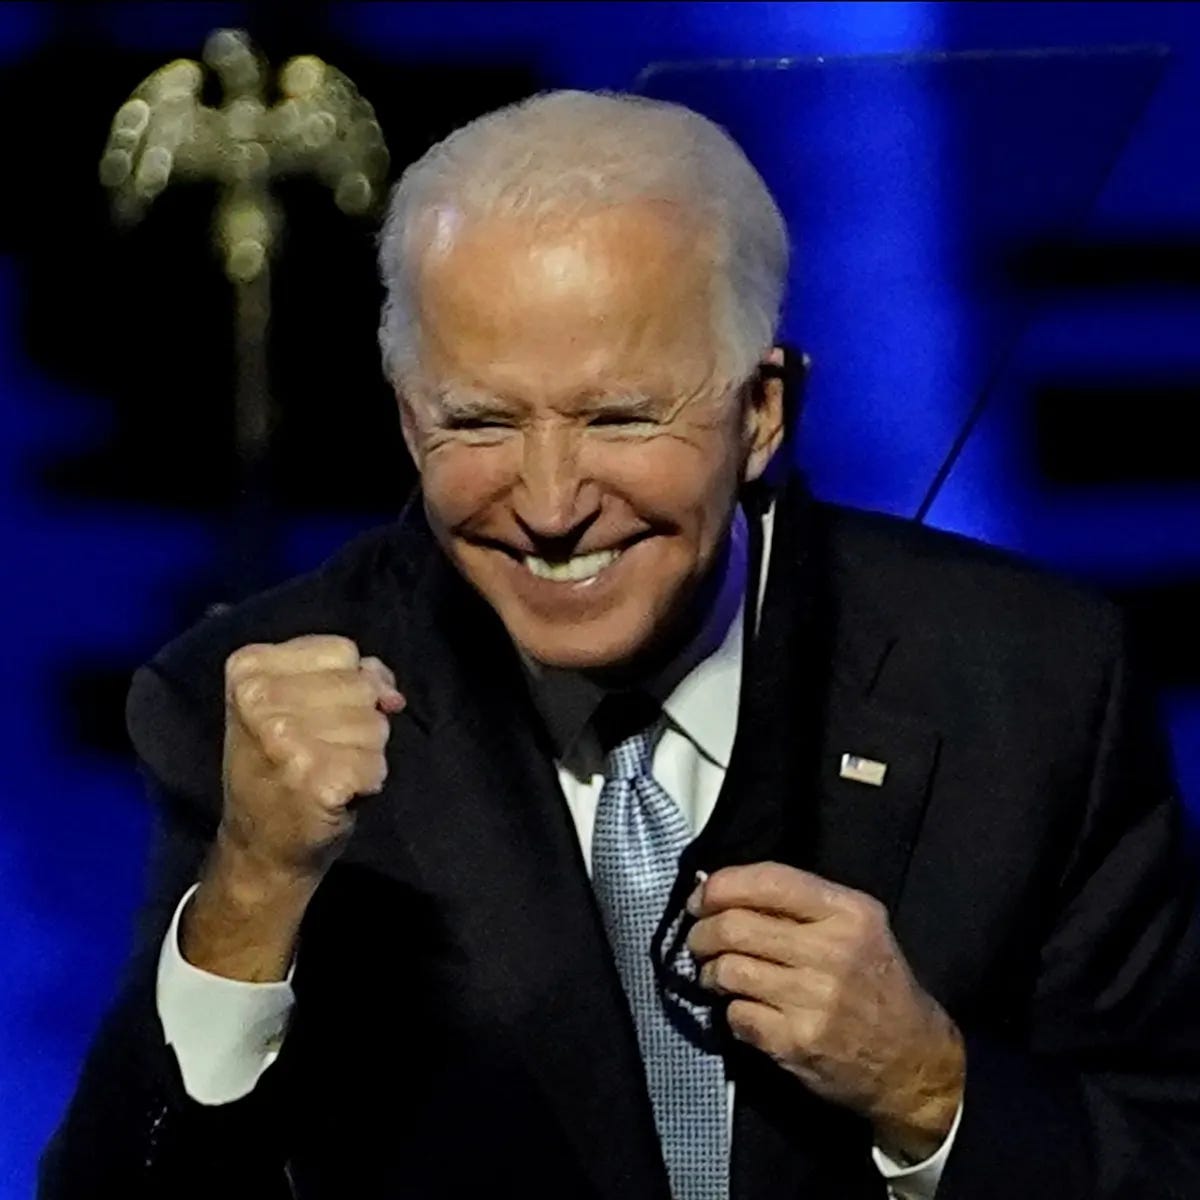 Joe Biden Is 78 Today. He's Just Getting Started. | by Will Leitch | Medium